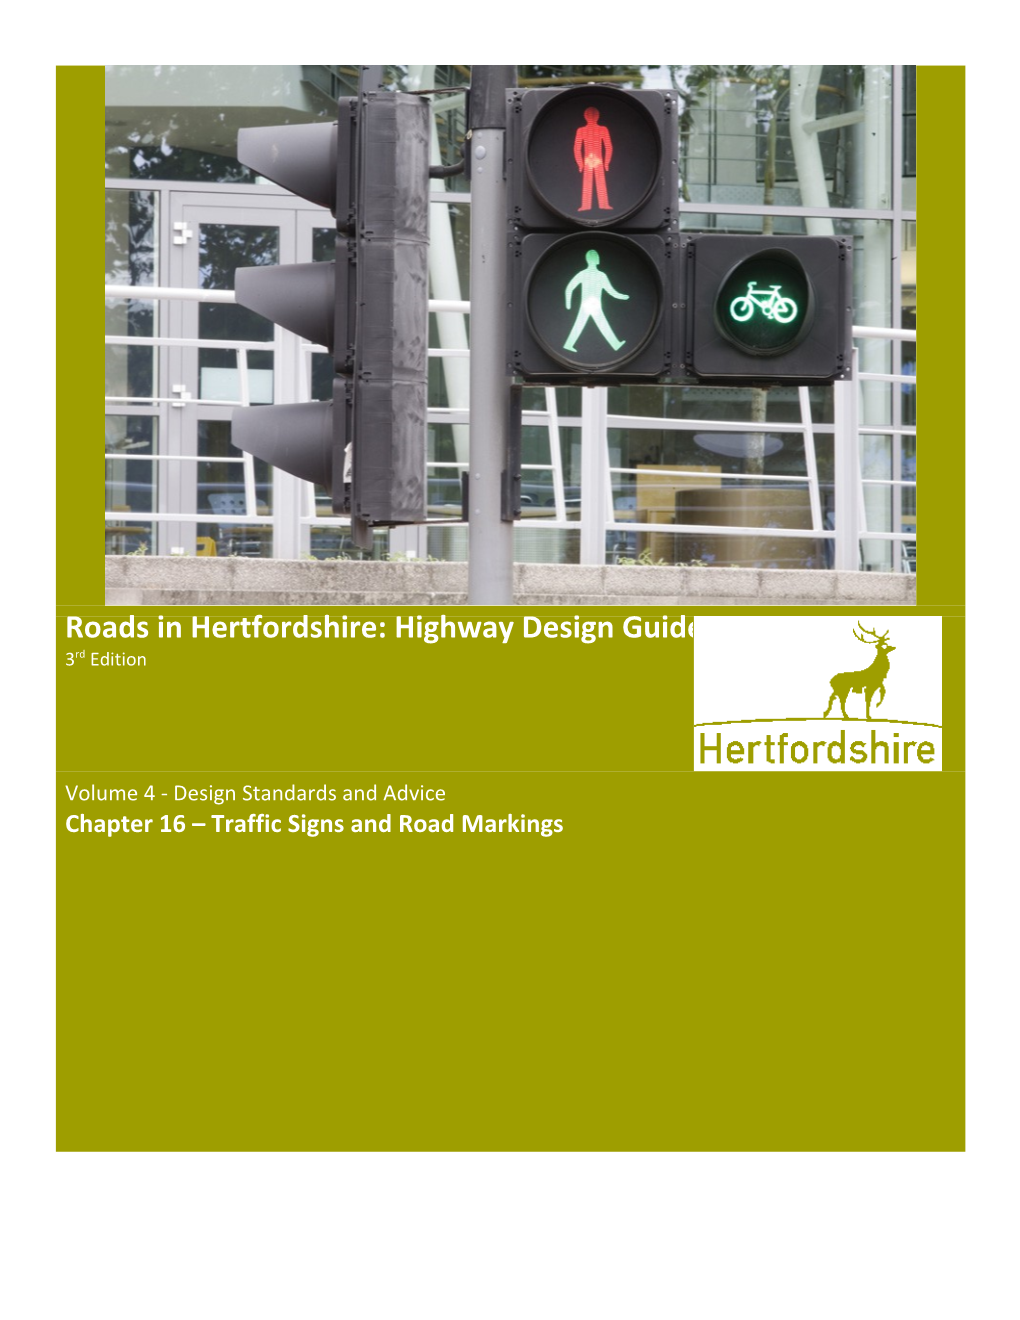 Roads in Hertfordshire 3Rd Edition Volume 3 Pre Consultation Draft 15 July 2010 for MRG